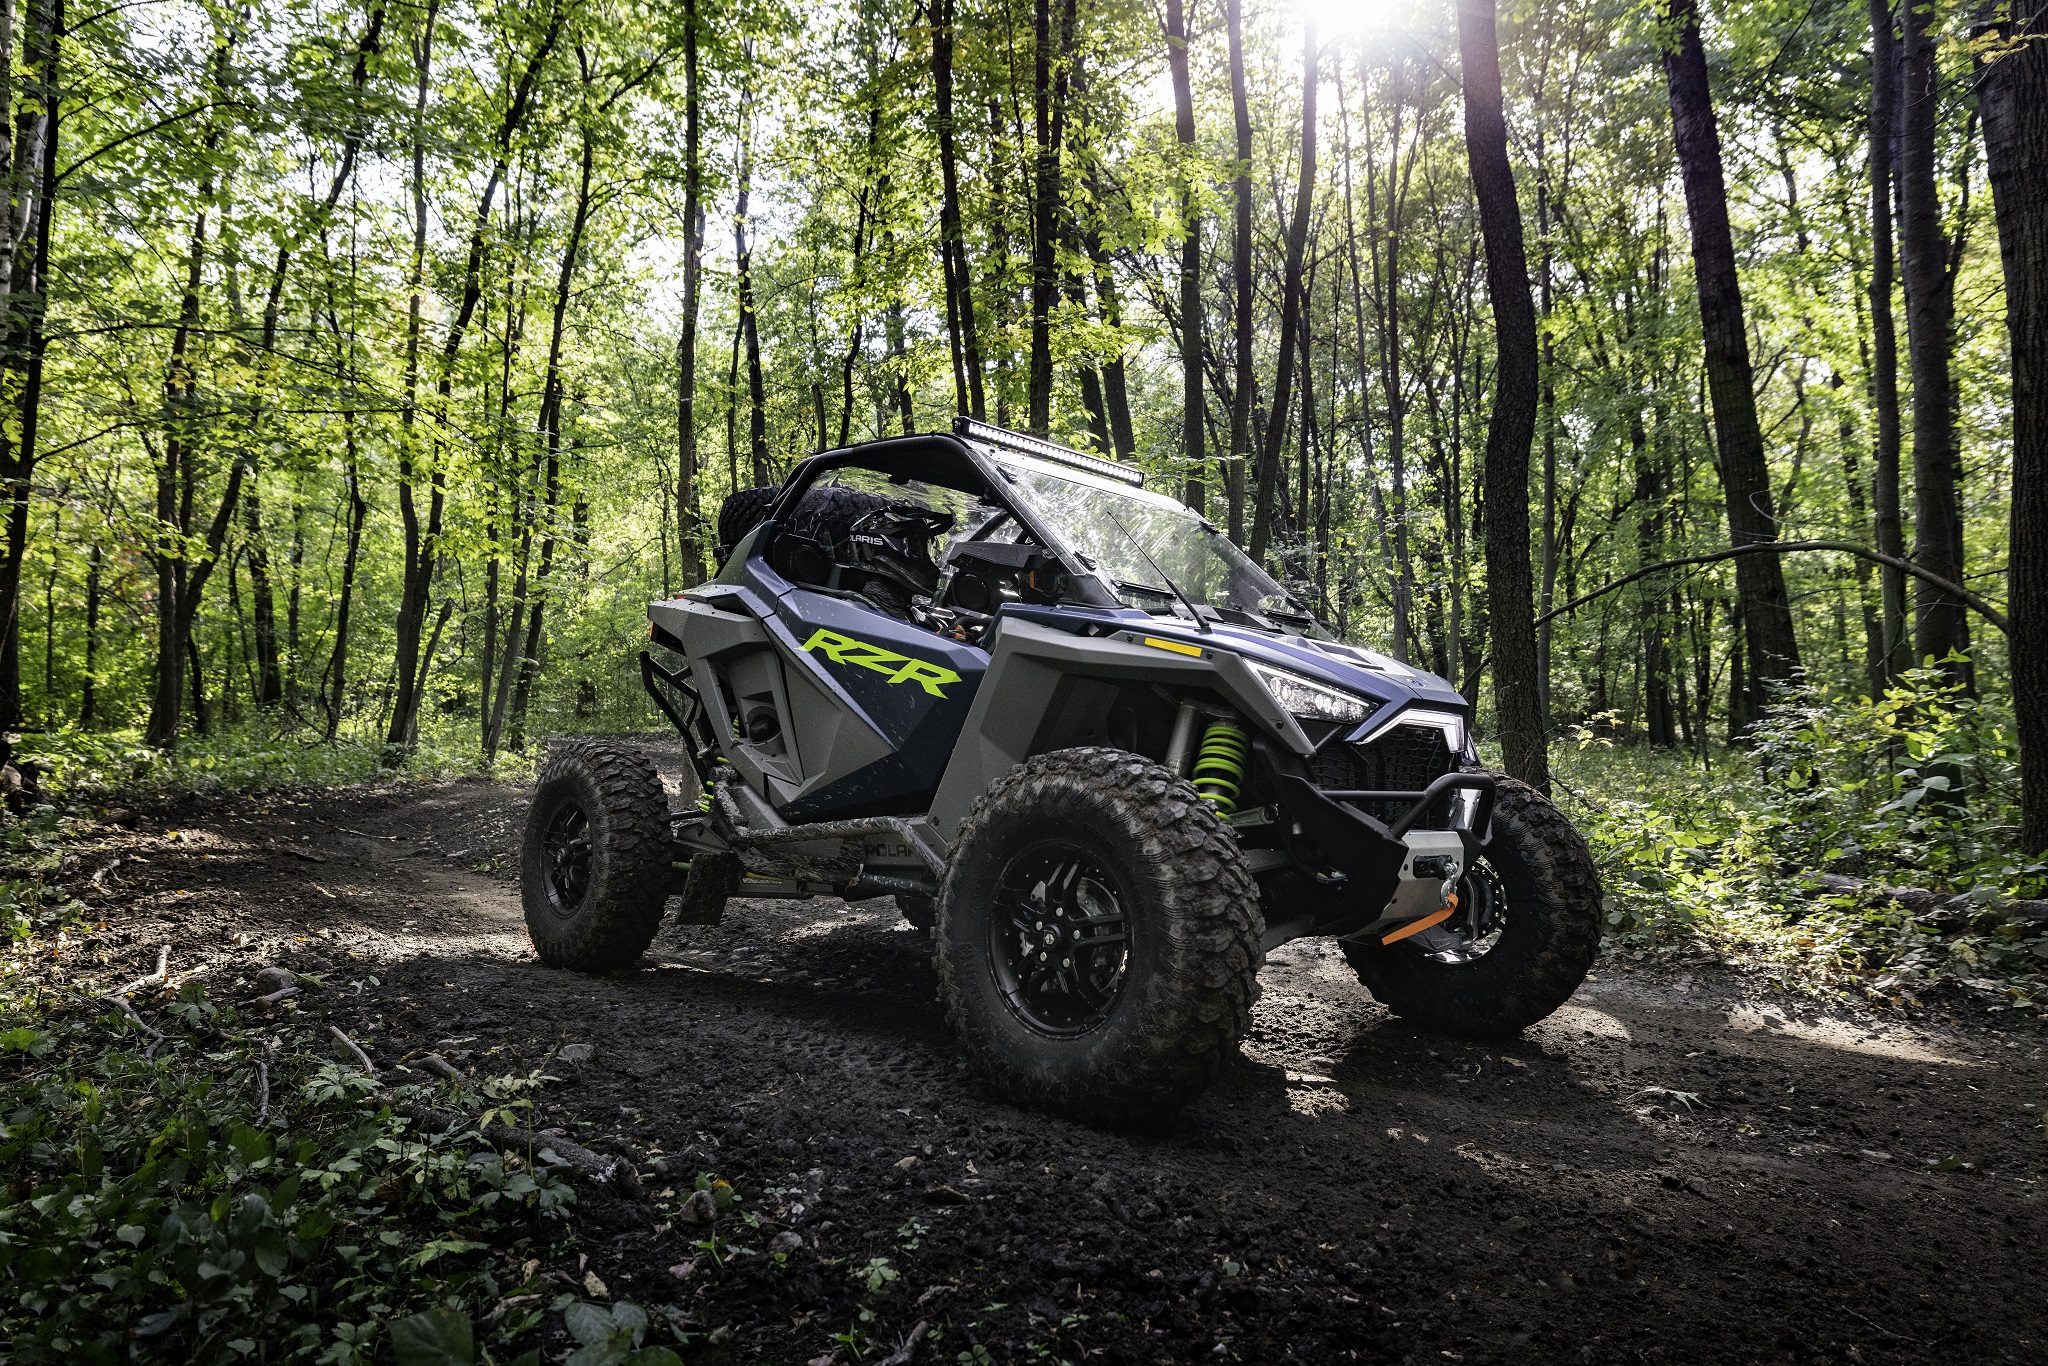 A green-and-gray 2022 Polaris RZR Turbo R Premium in the forest